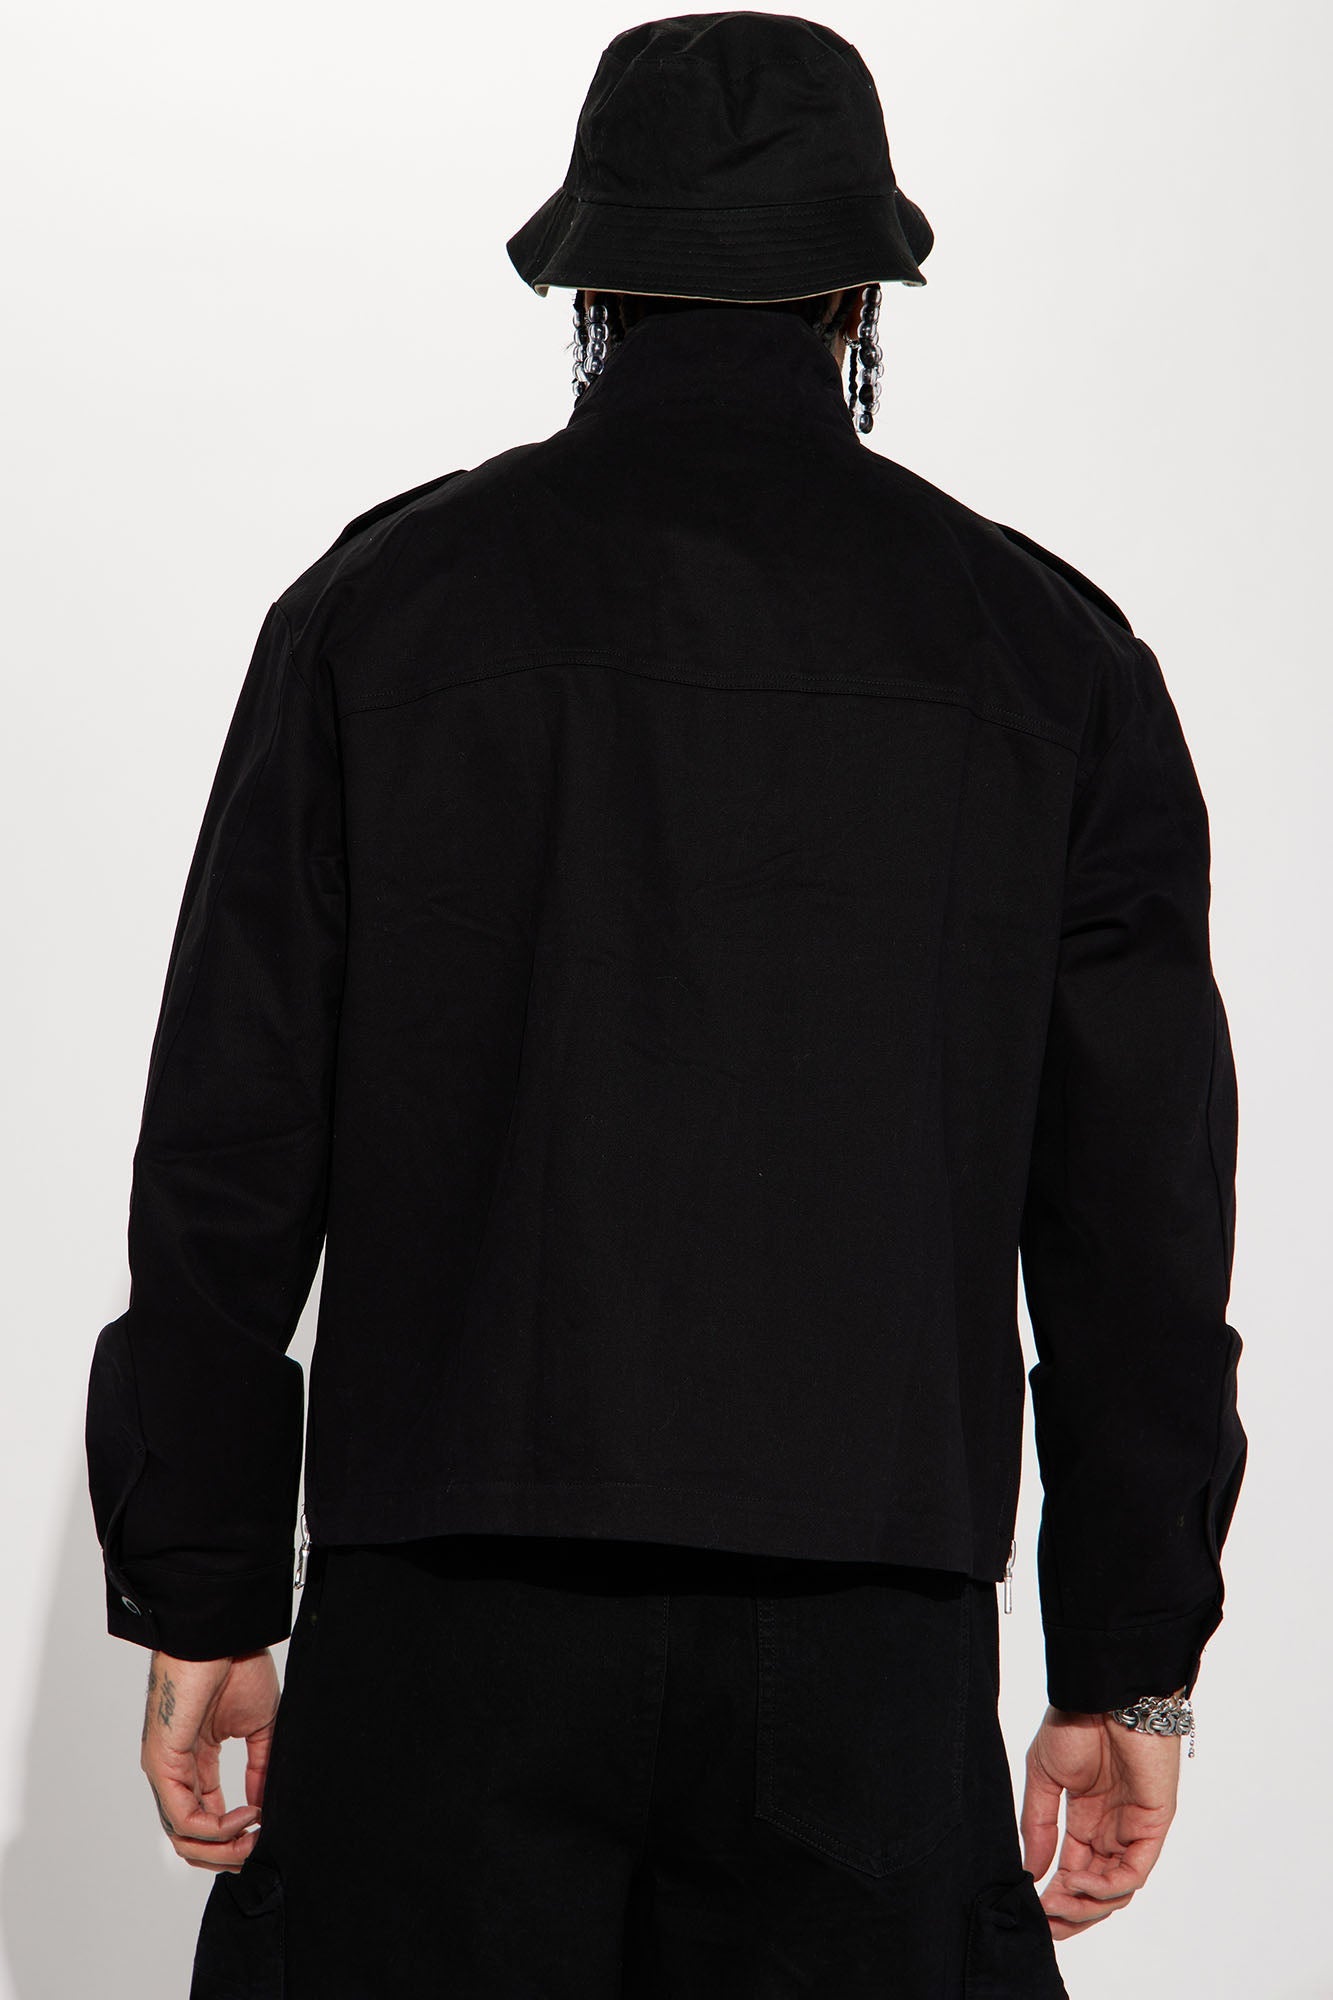 Only Better Twill Military Jacket - Black